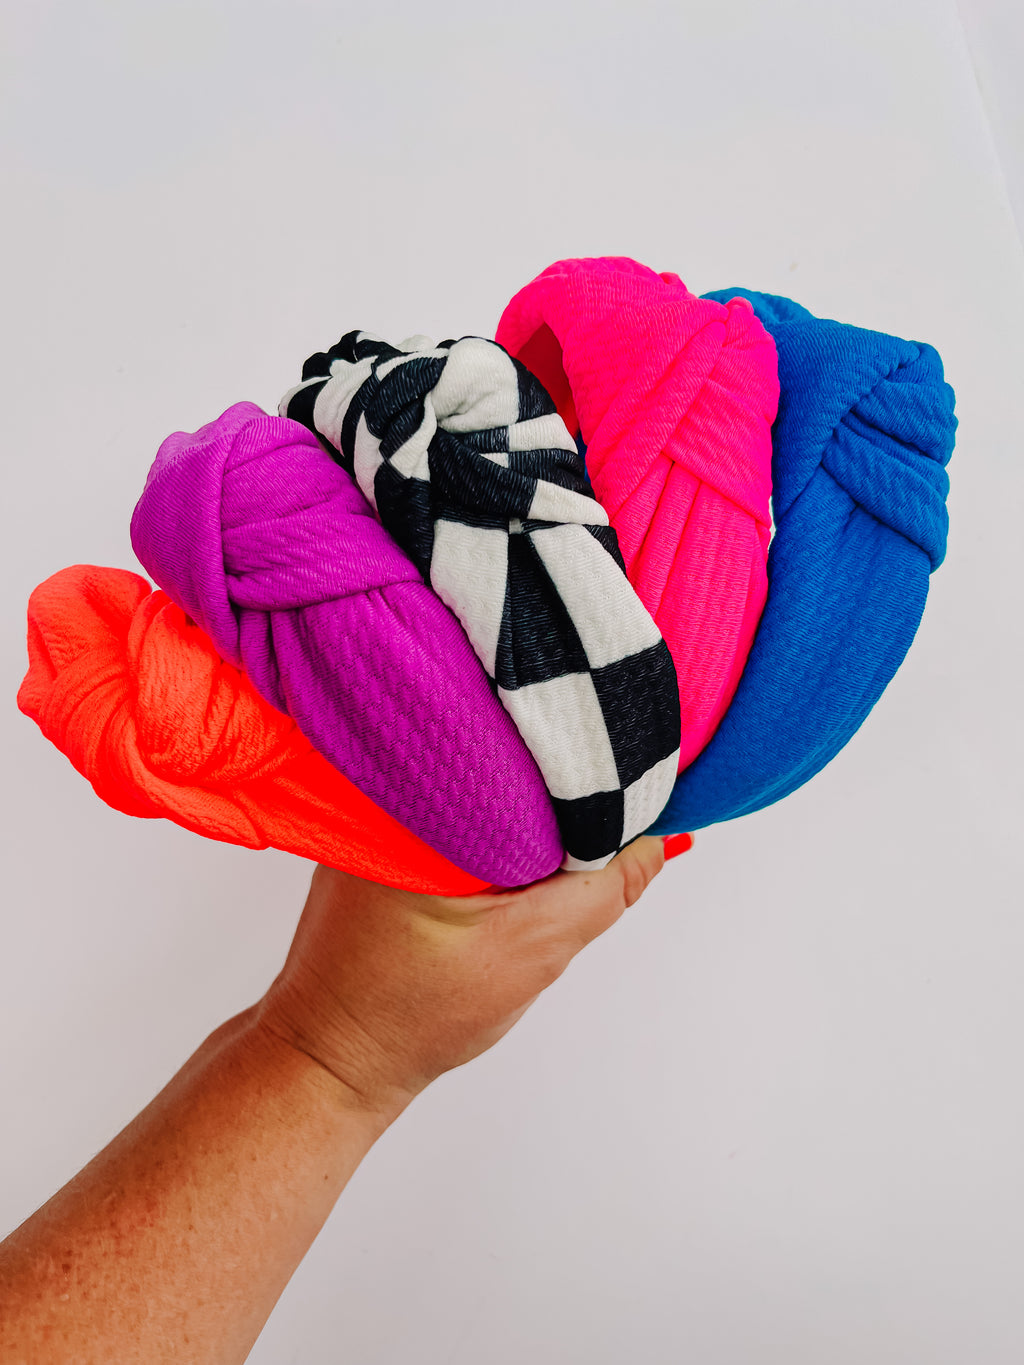 Neon Checkered Knotted Headbands for Girls & Women